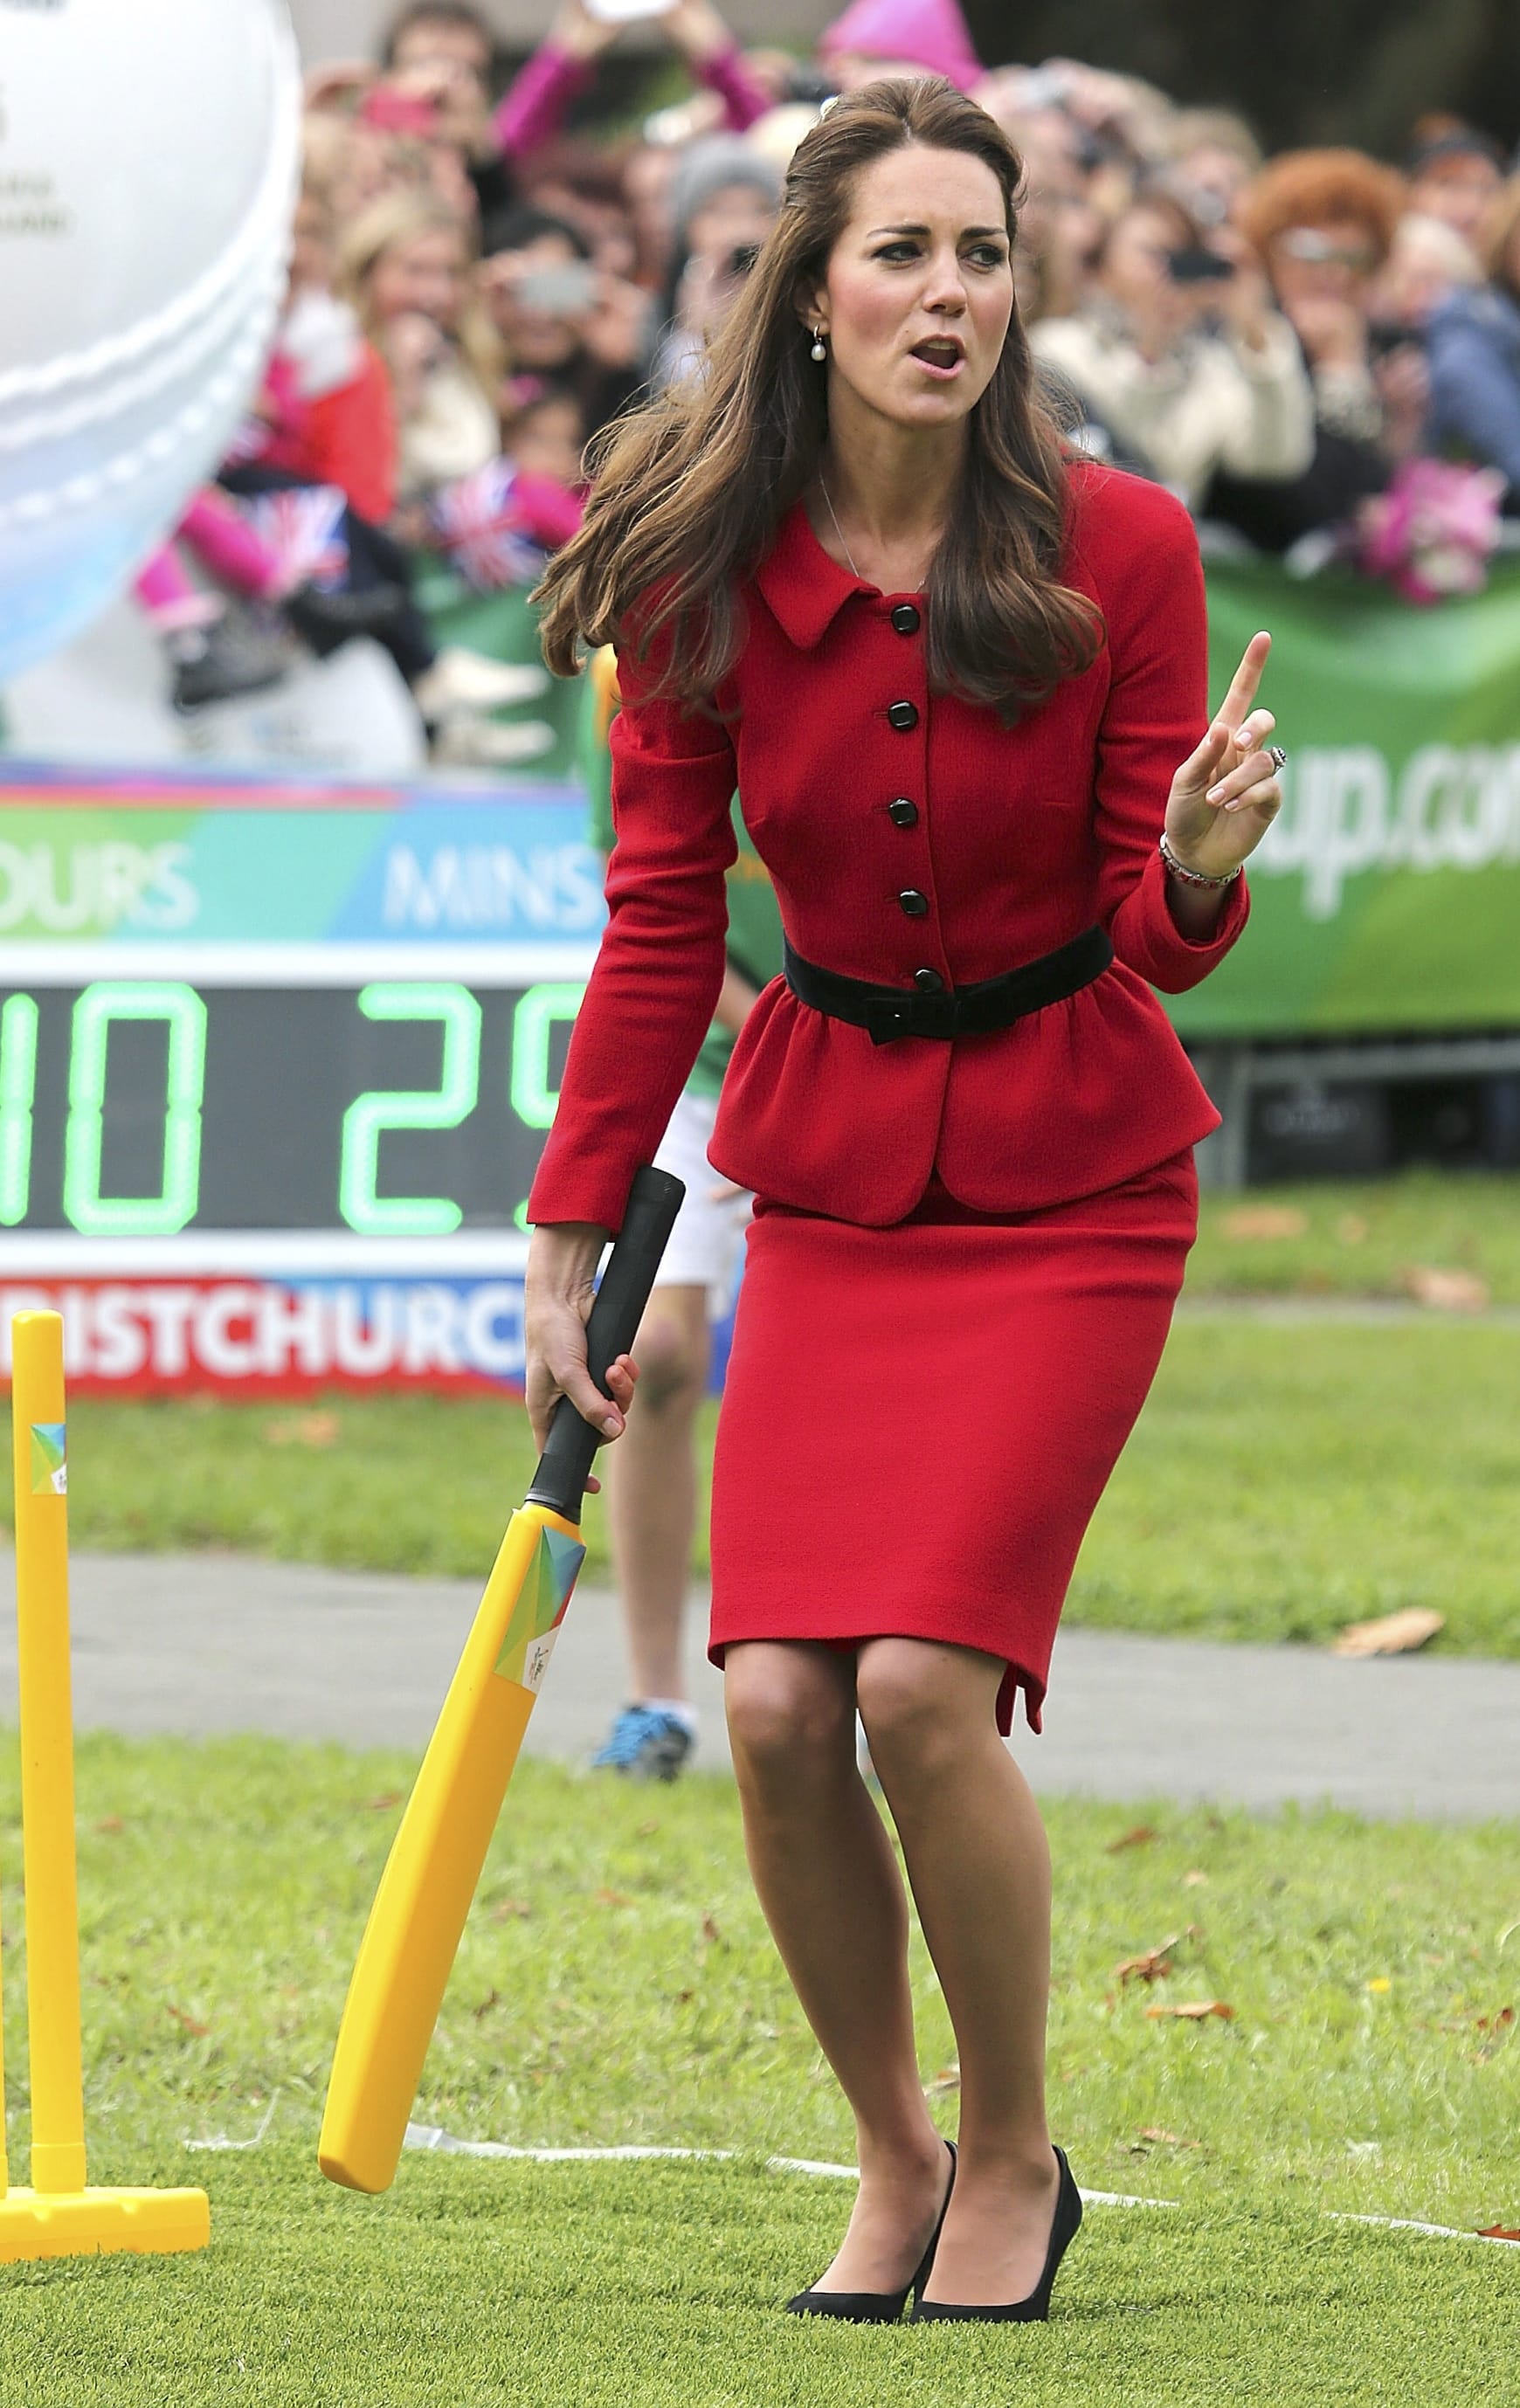 Kate, the Duchess of Cambridge, plays cricket April 14 in Latimer Square in Christchurch, New Zealand.